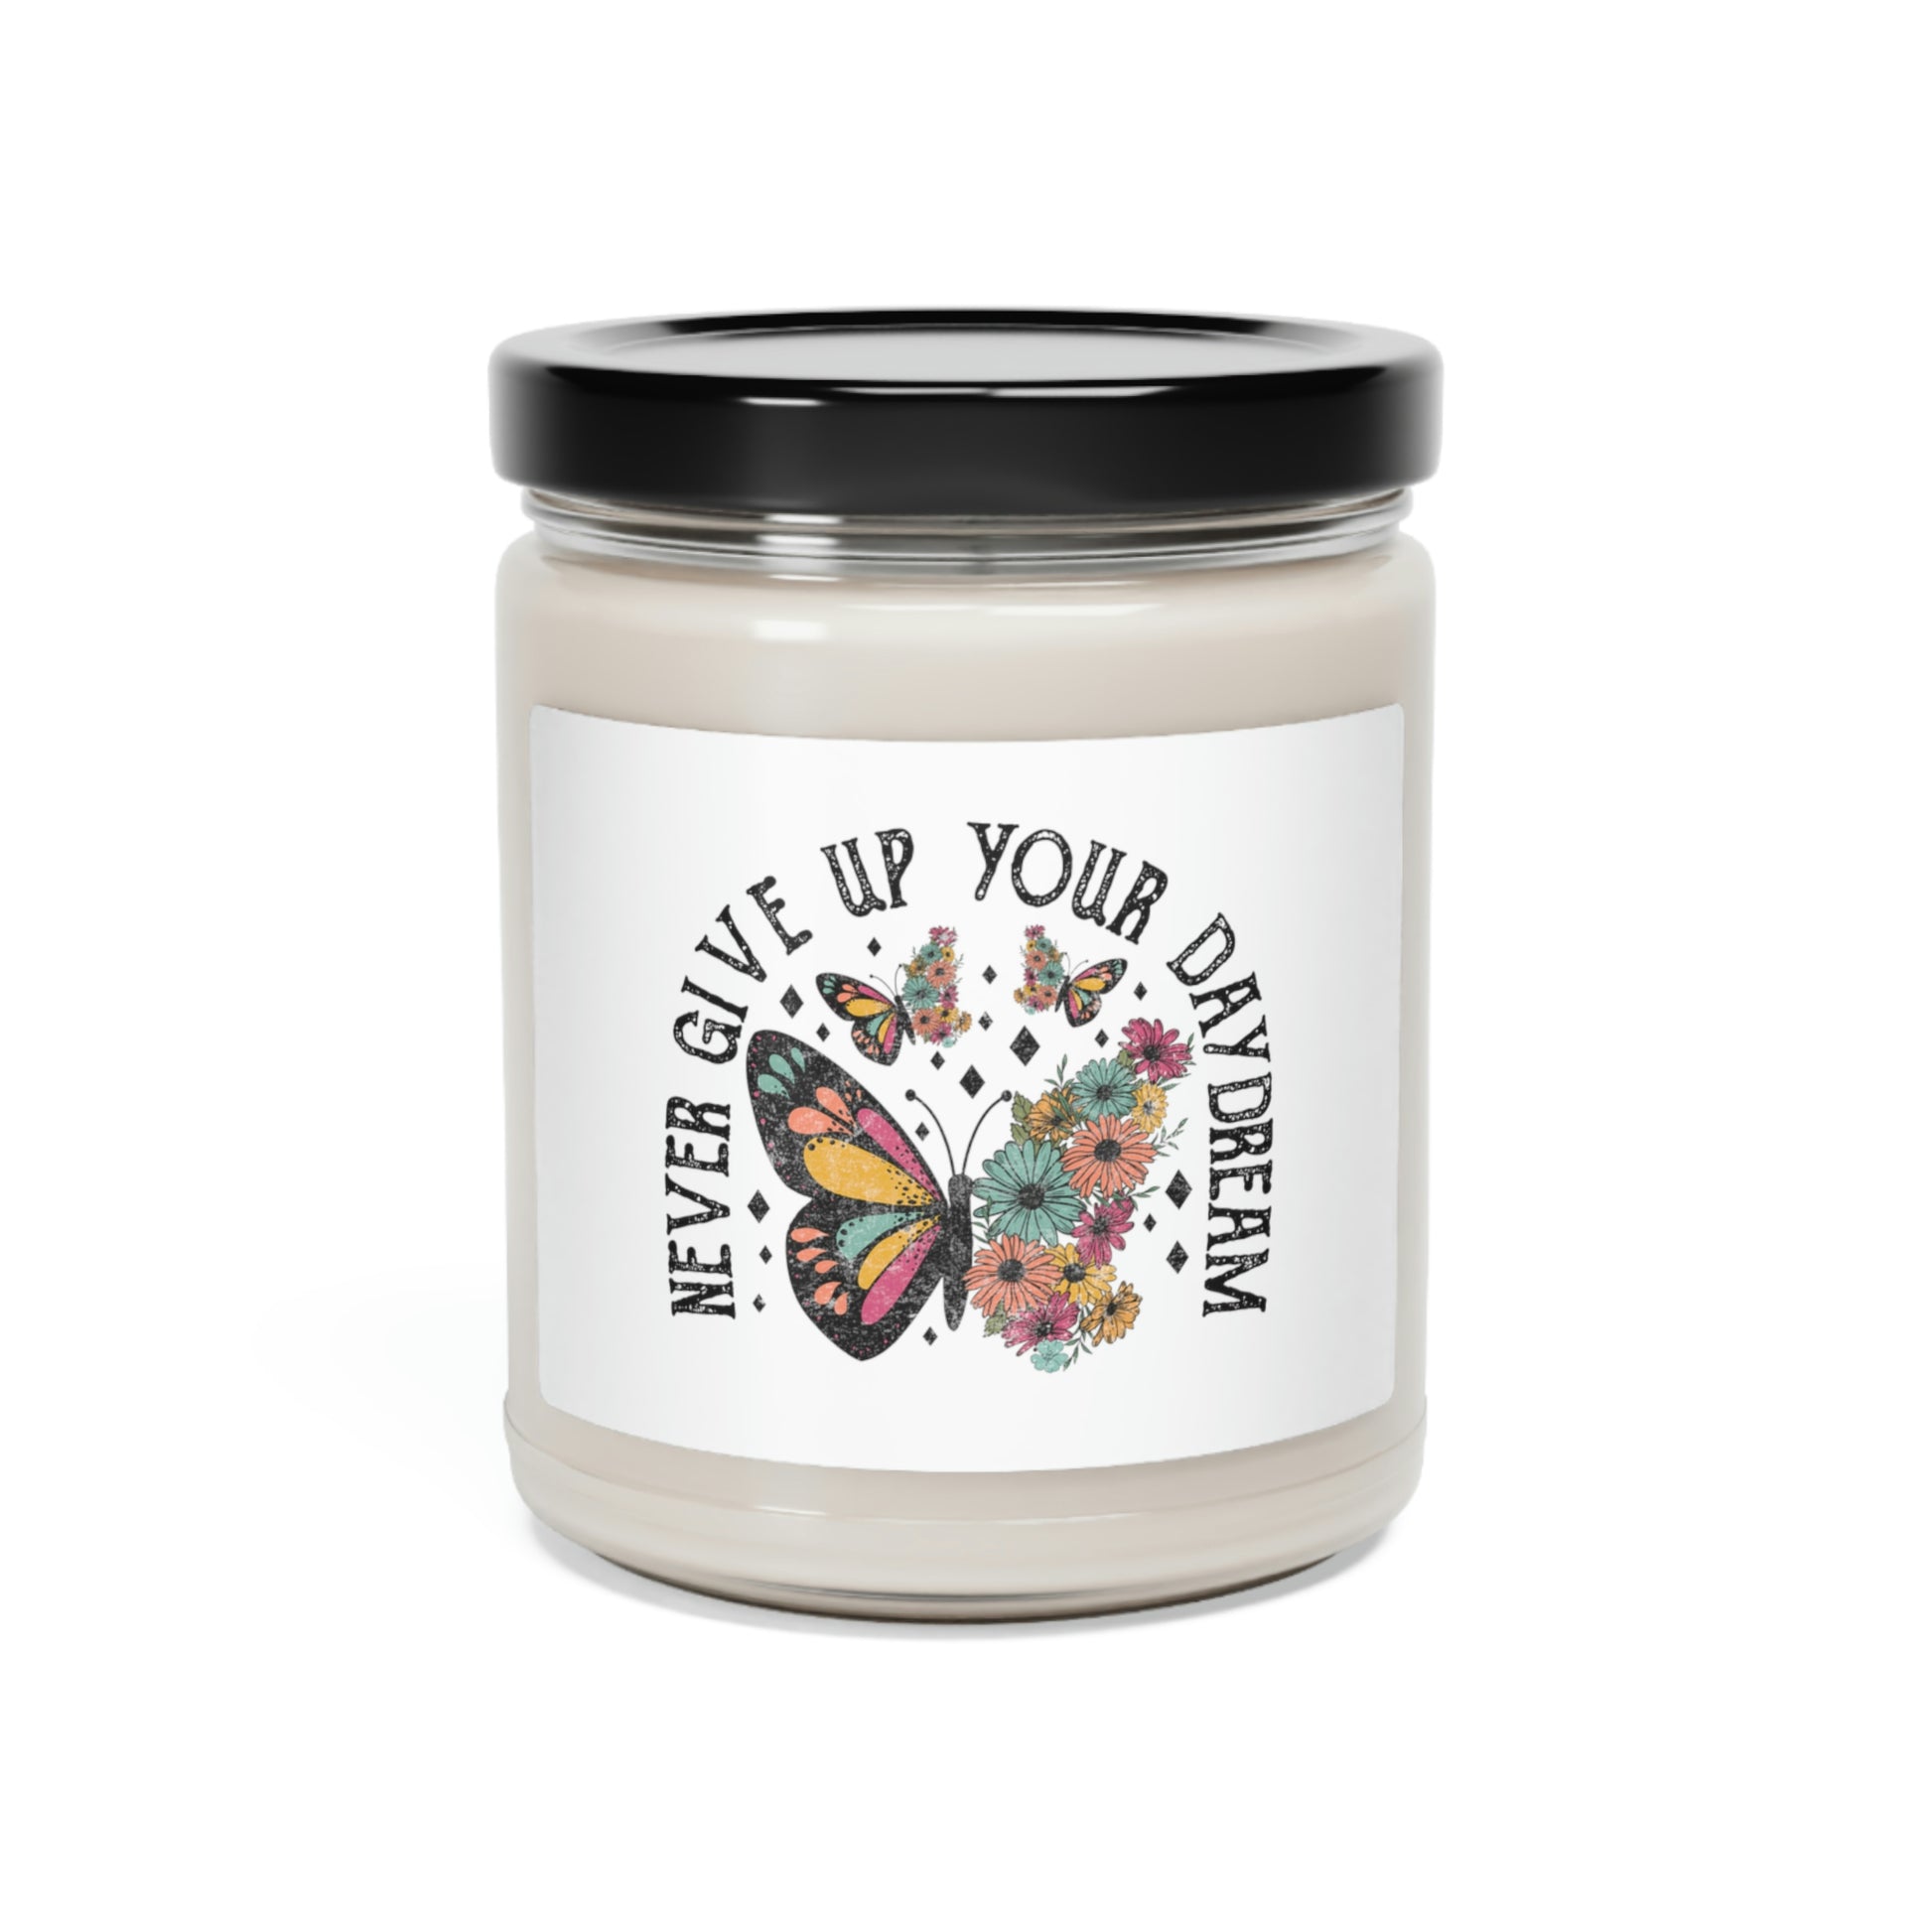 Never give up your day dream Scented Soy Candle, 9oz